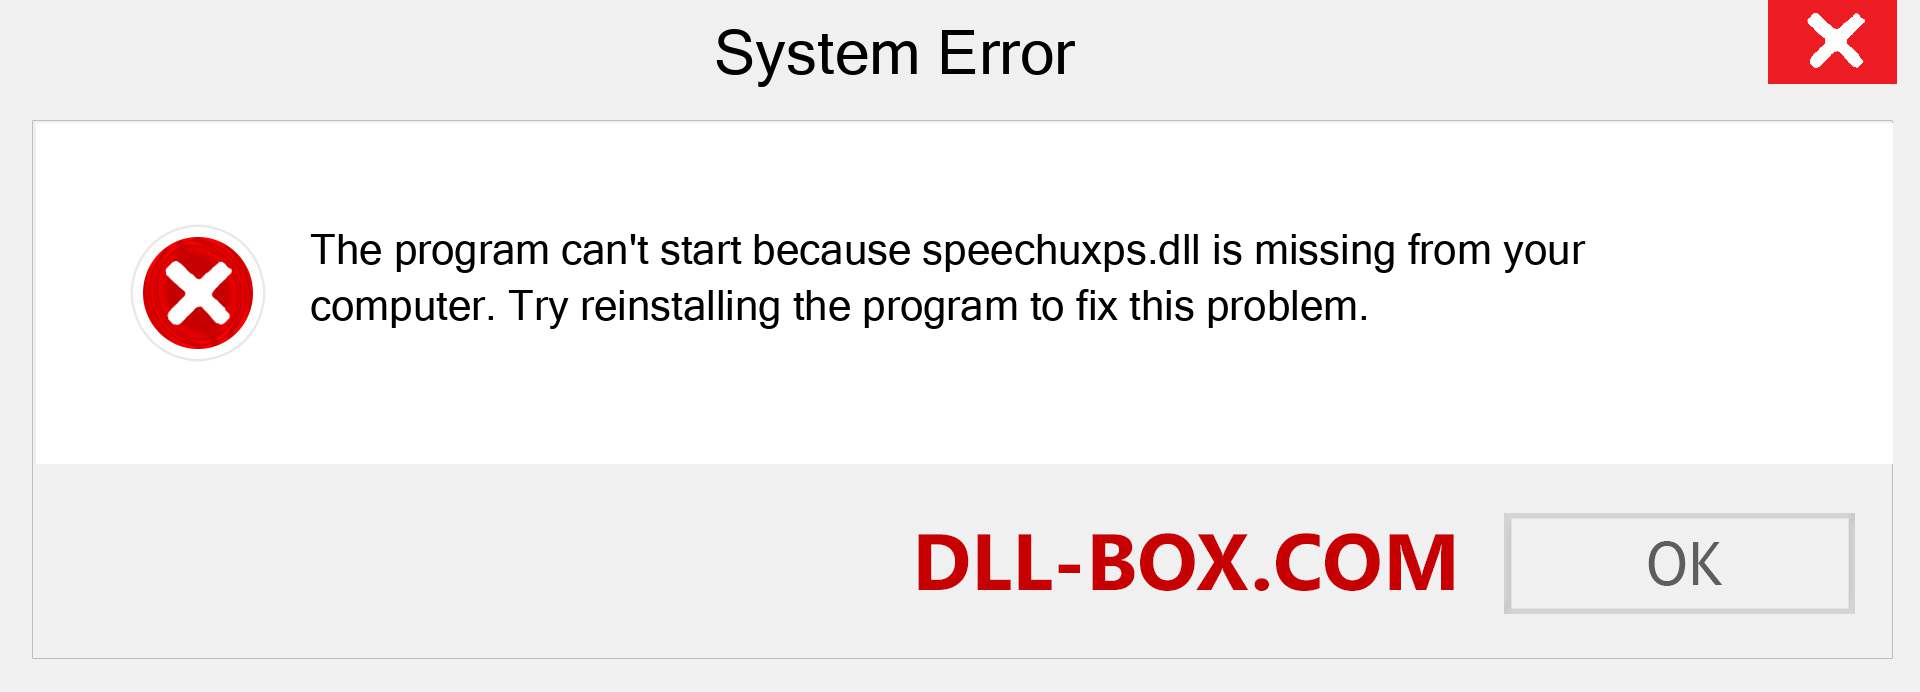  speechuxps.dll file is missing?. Download for Windows 7, 8, 10 - Fix  speechuxps dll Missing Error on Windows, photos, images